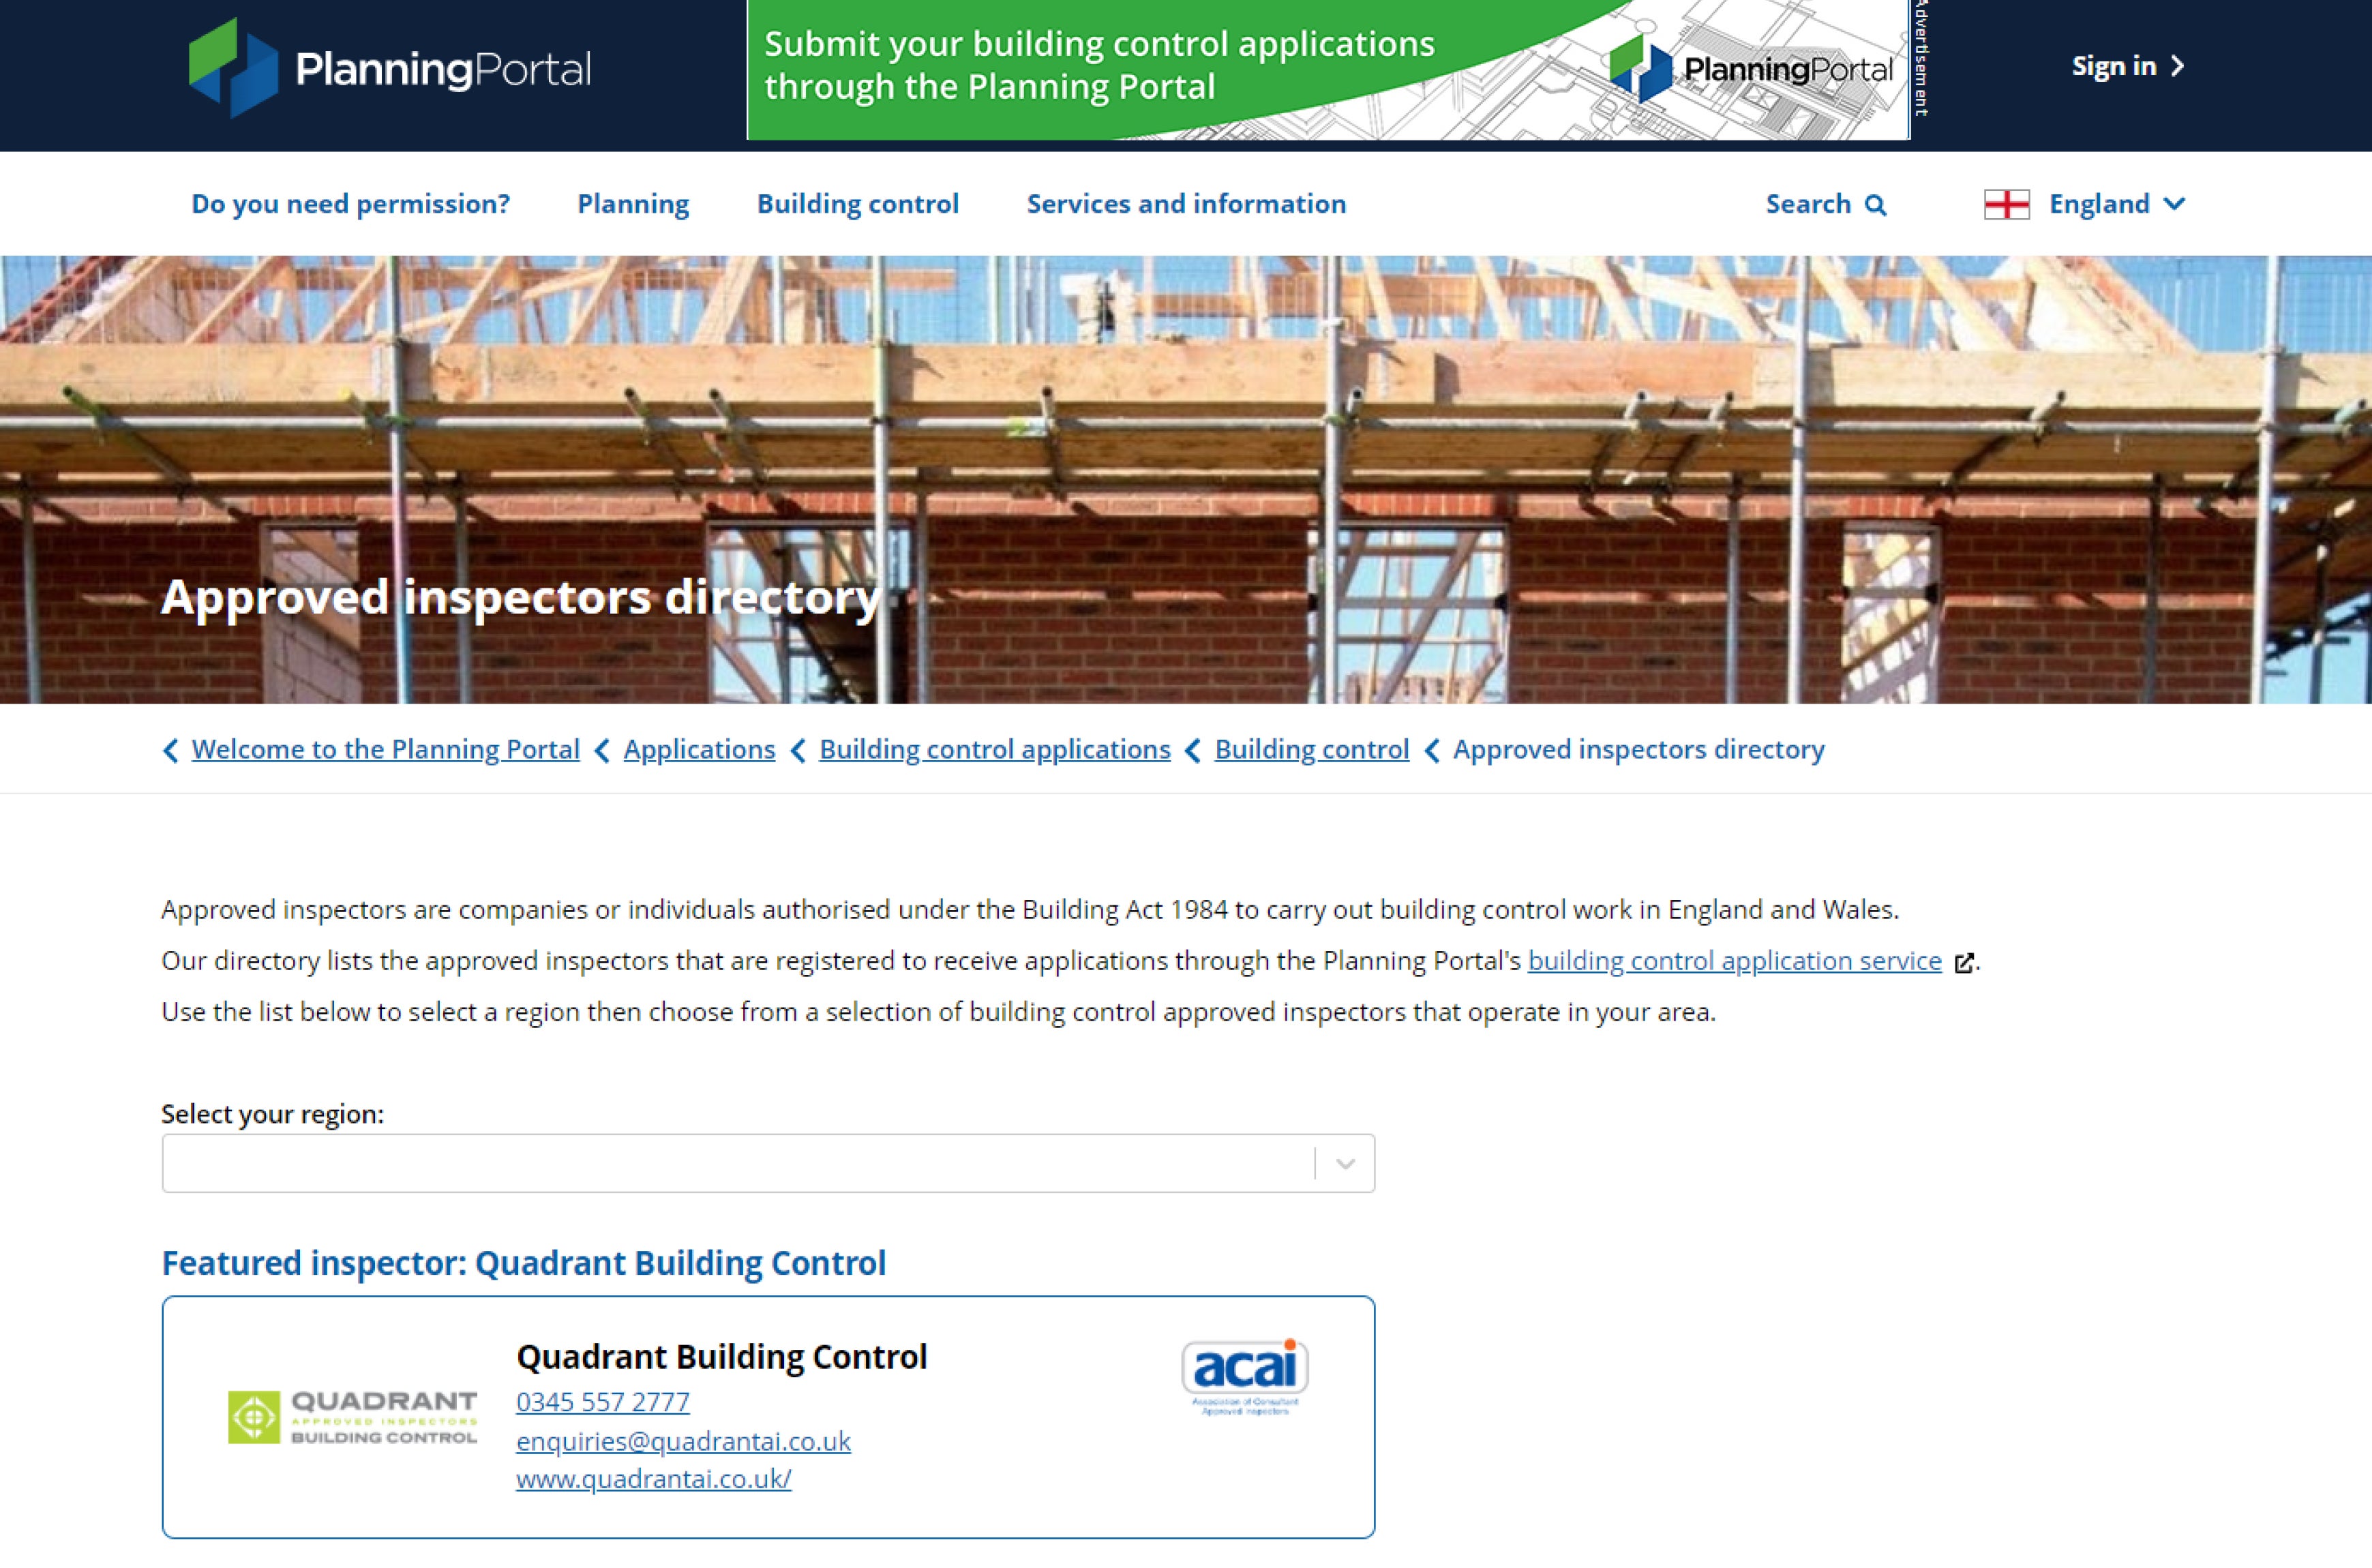 Screenshot of the Approved Inspectors Directory on the Planning Portal website